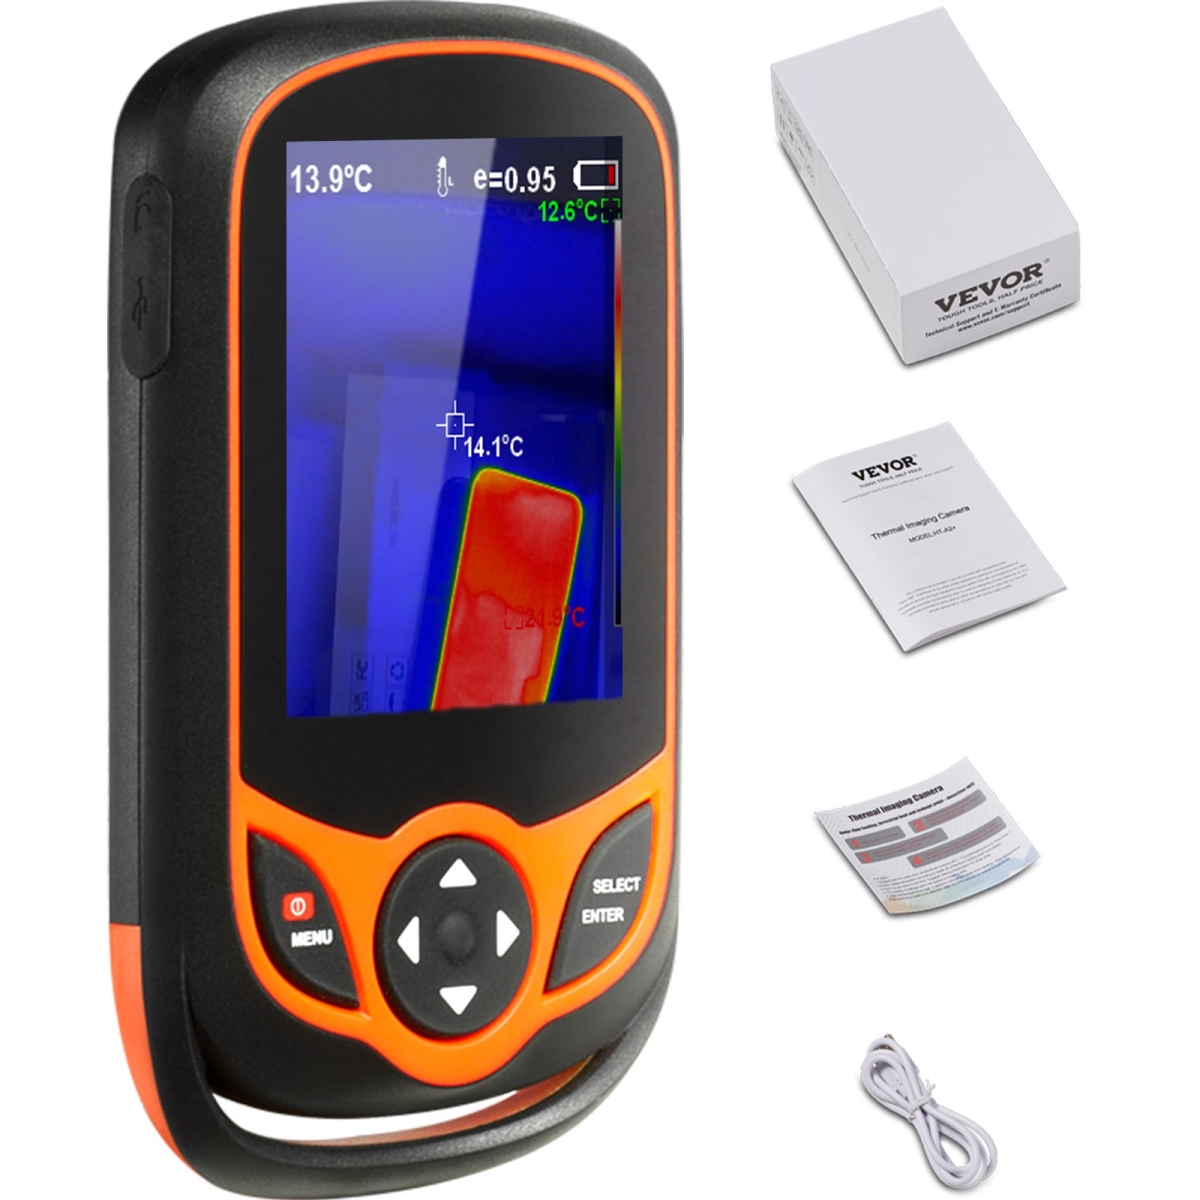 Picture of Vevor KDSRCXY256198DK0SV9 Thermal Imaging Camera&#44; 256 x 192 IR Resolution Pocket Infrared Thermal Imager with WiFi&#44; 25Hz Refresh Rate Thermal Camera Pocket